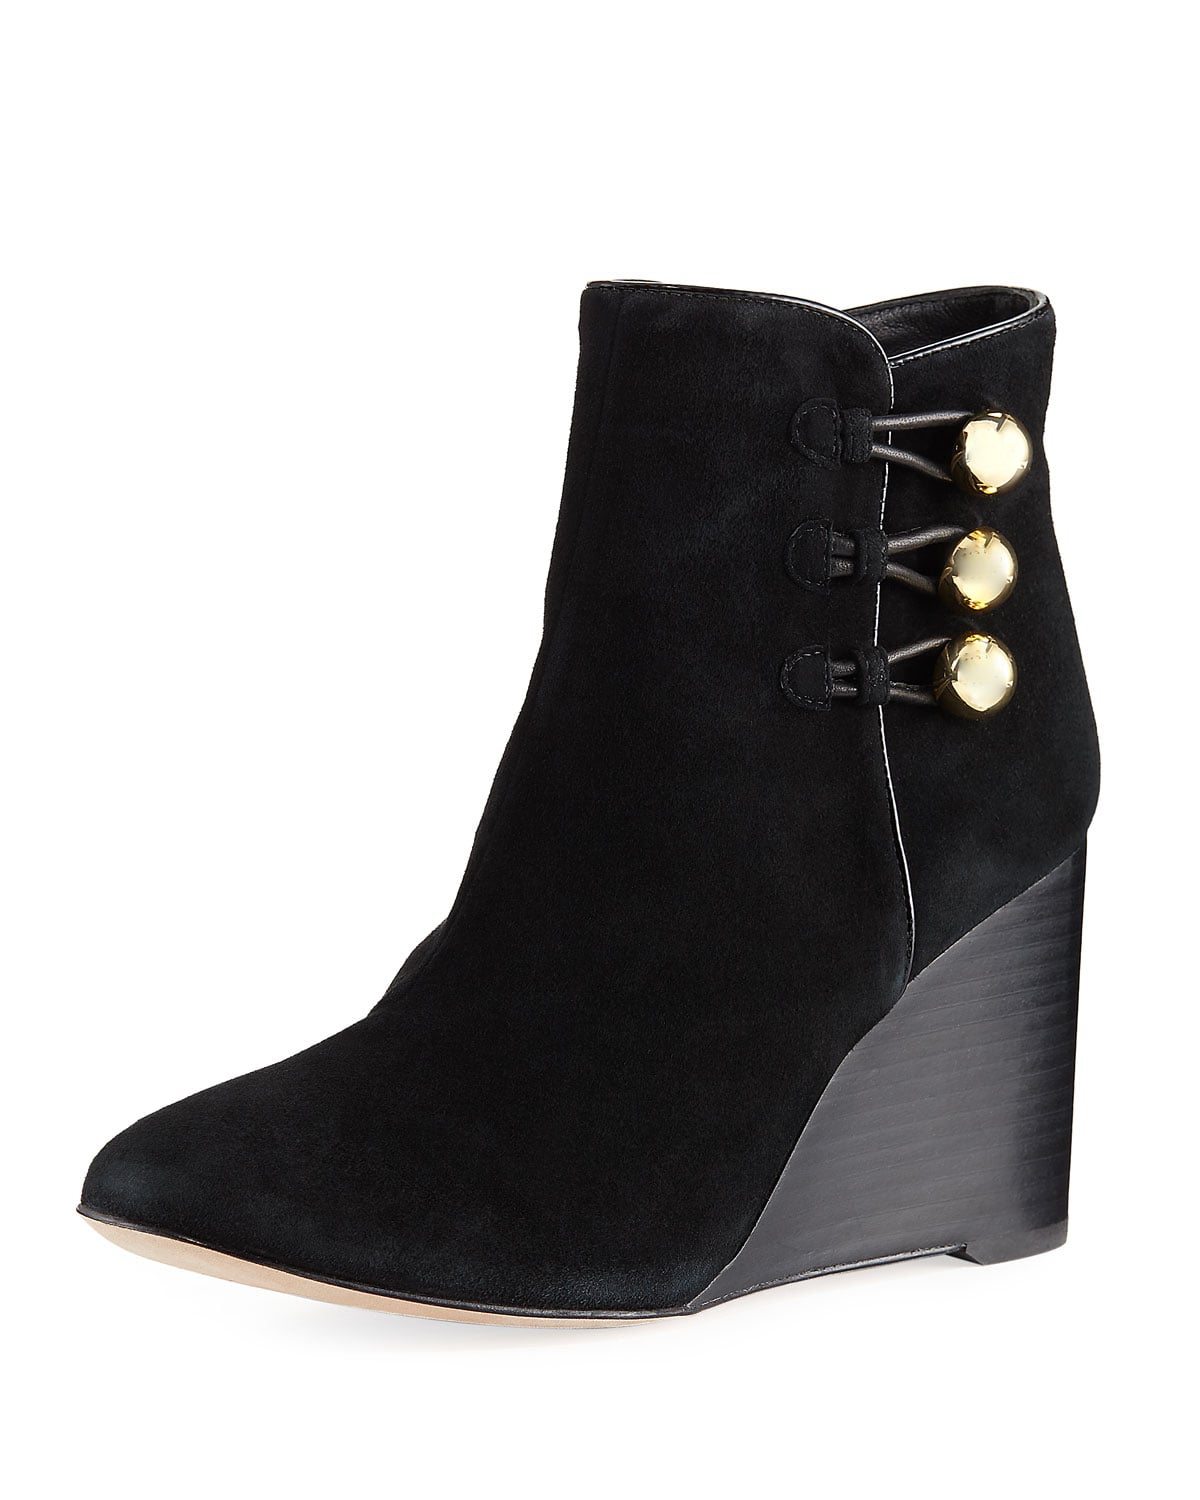 Kate Spade Geraldine Suede Wedge Bootie | Pippa Middleton's Mom Showed Her  the Proper Winter Boots to Wear With Tights | POPSUGAR Fashion Photo 7